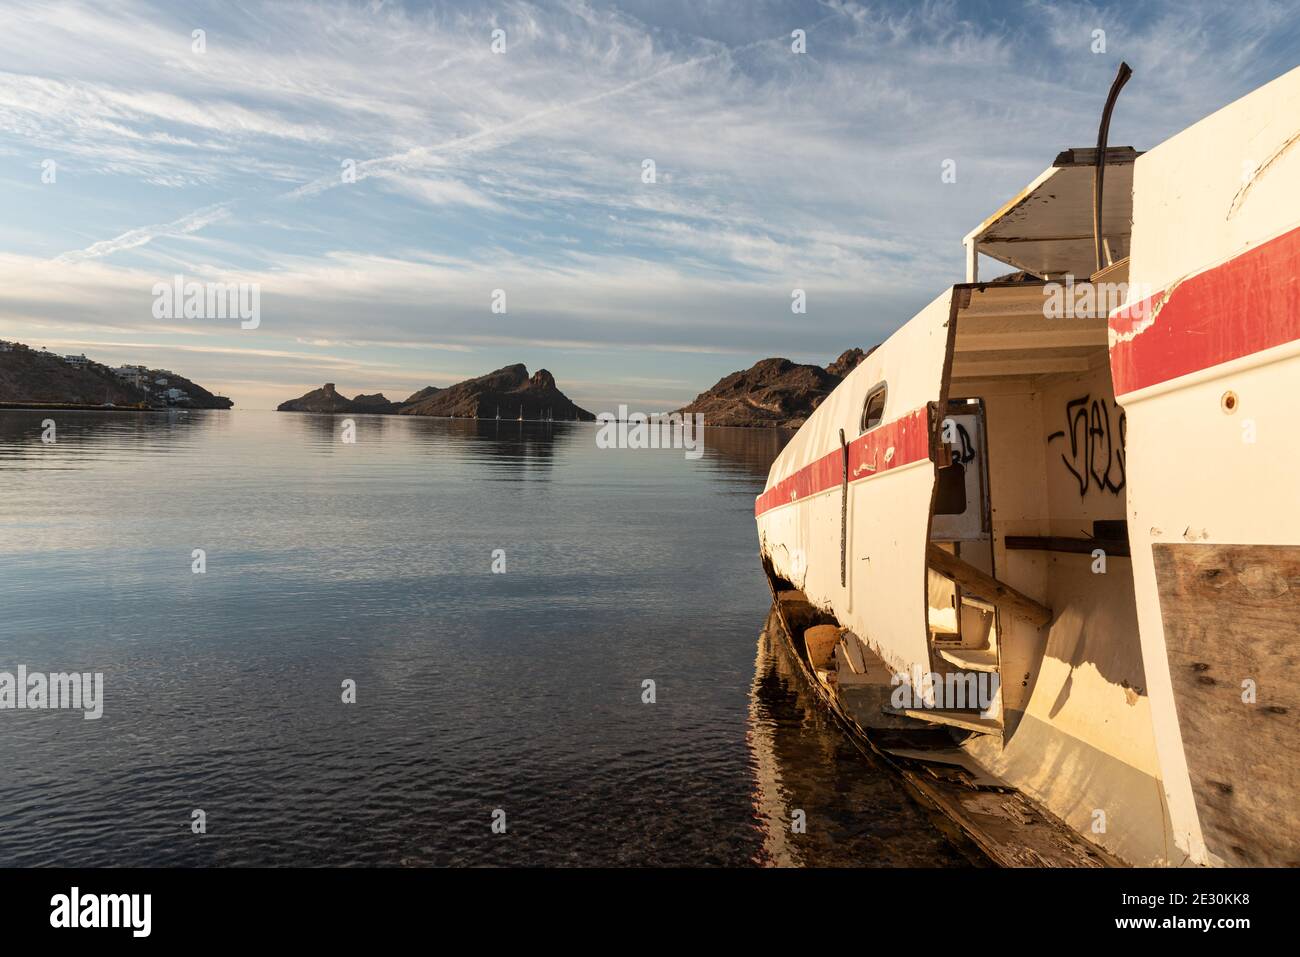 Looking across a shipwrecked sailboat on the beach out onto the bay of San Carlos, Sonora, Mexico. Stock Photo